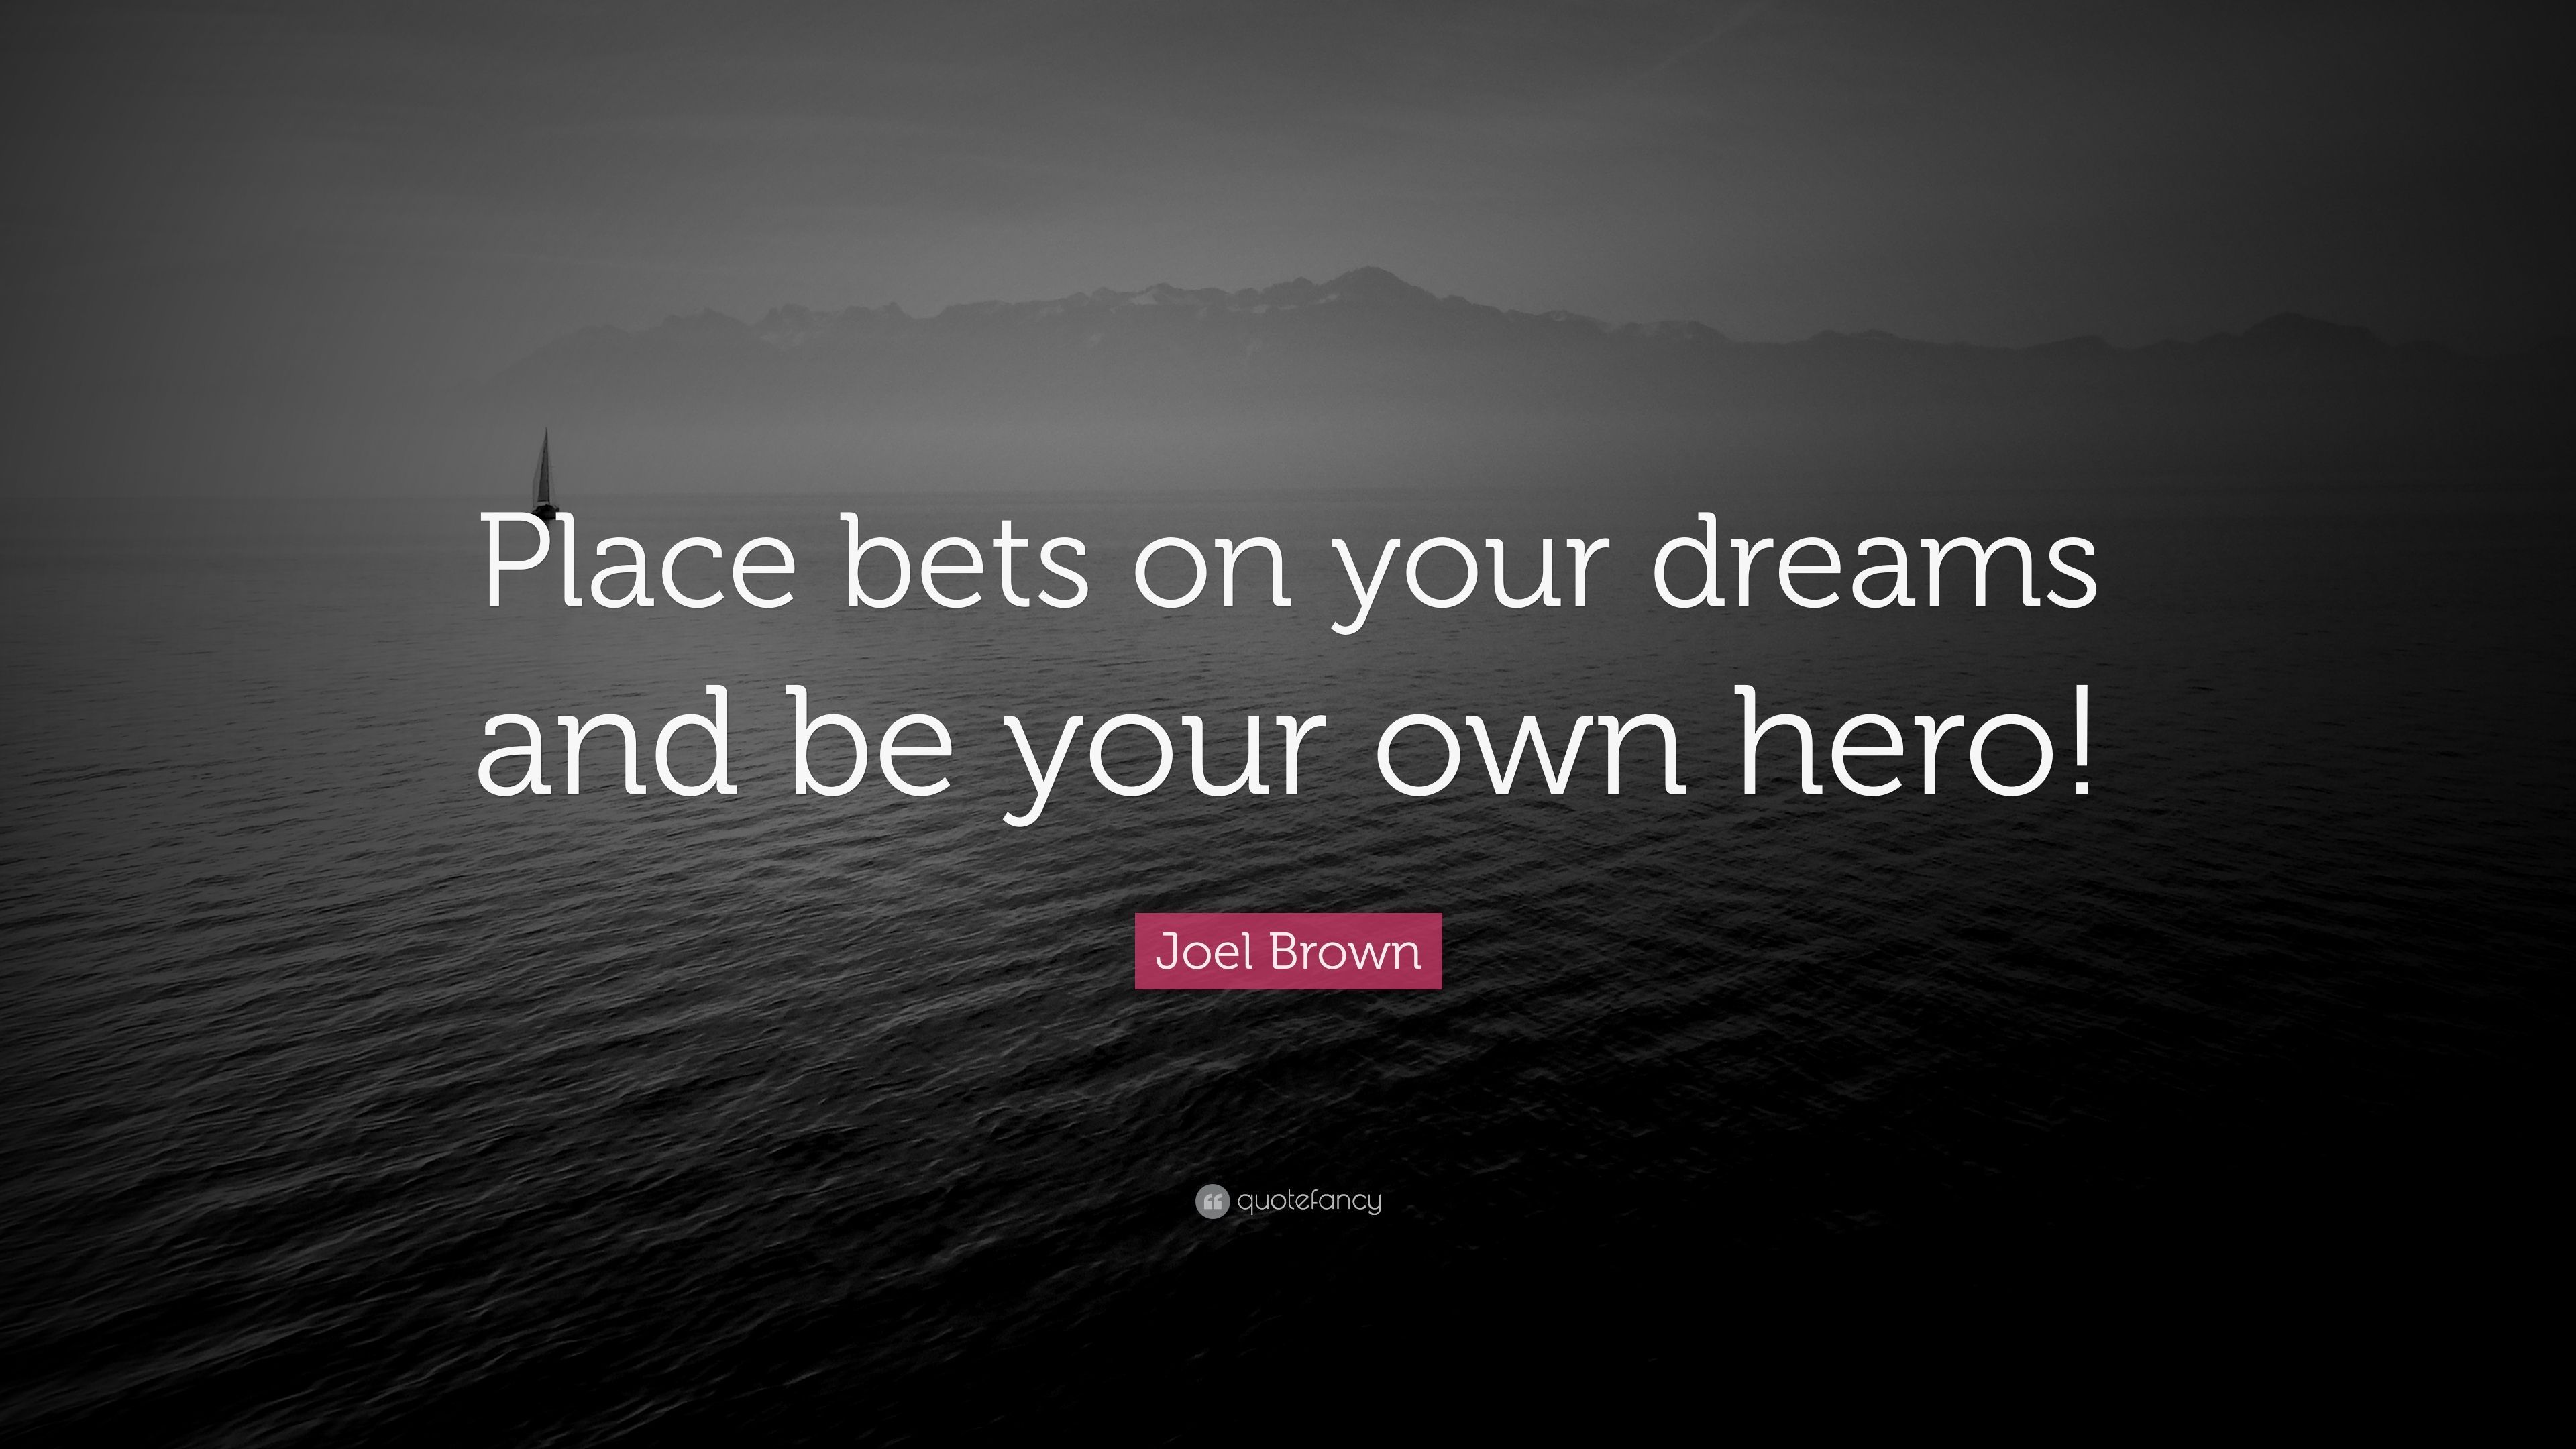 Joel Brown Quote: “Place bets on your .quotefancy.com